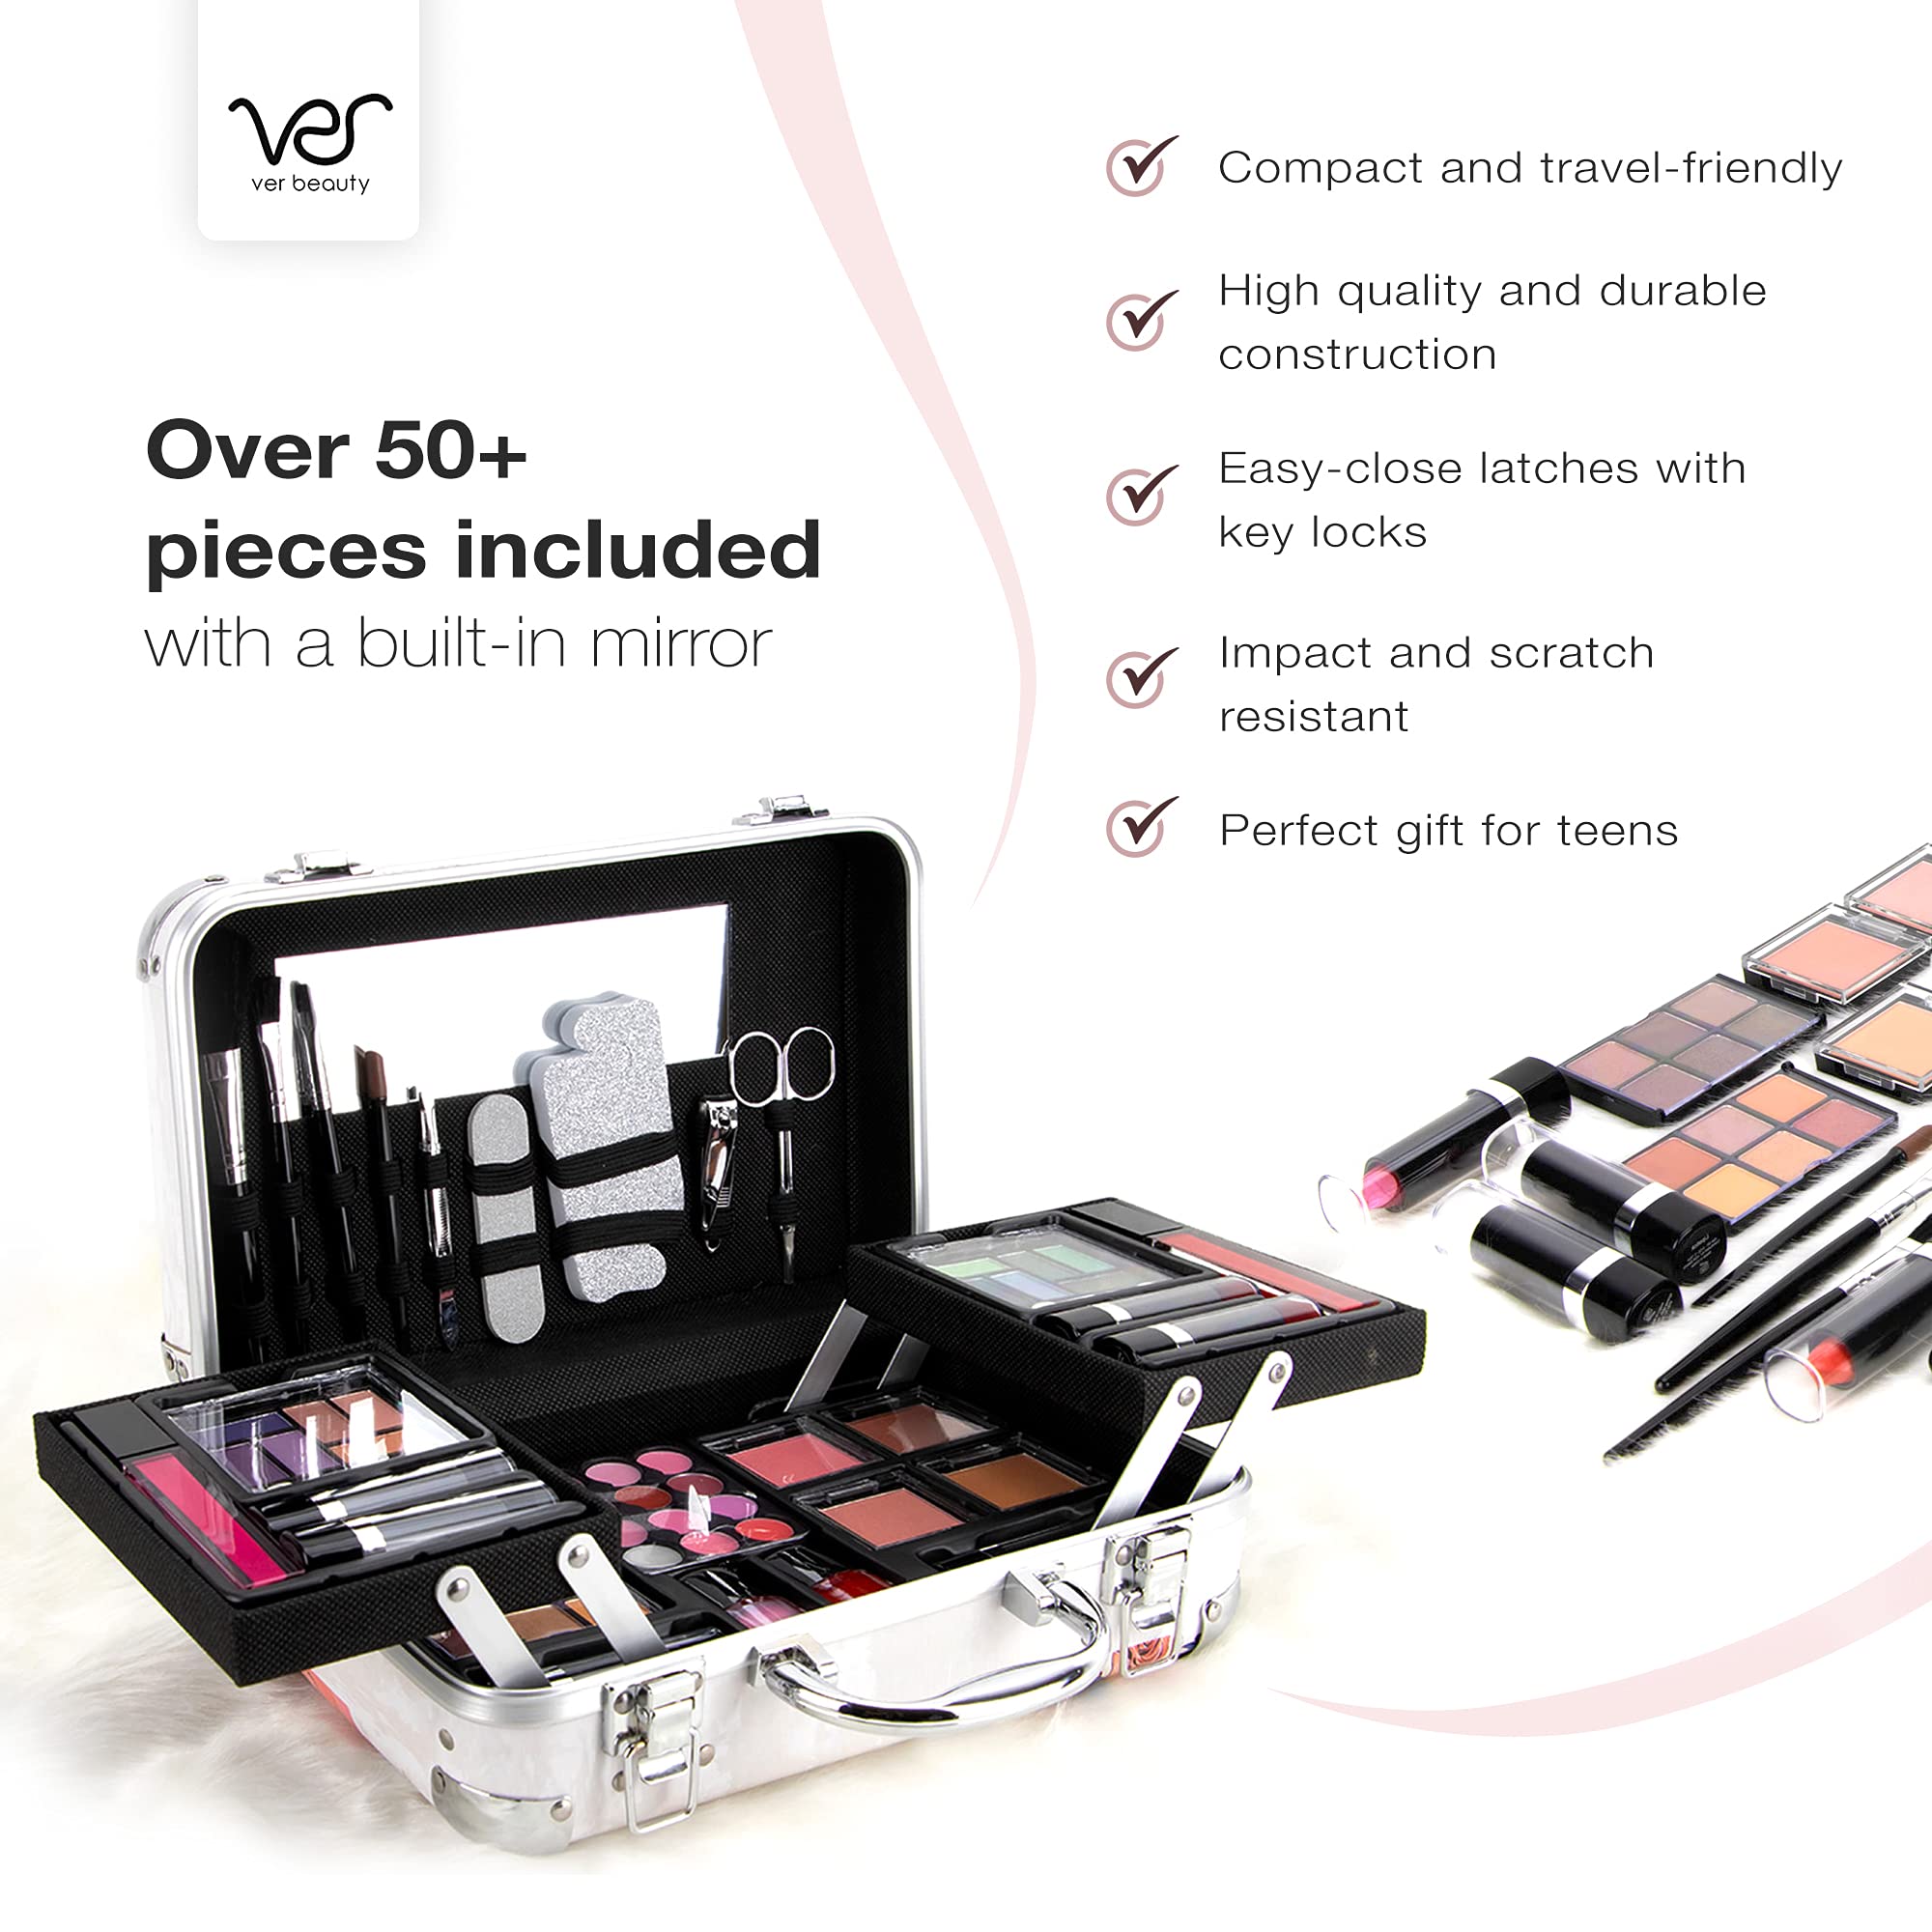 Ver Beauty Makeup Box with Makeup Included – Makeup Train Case with Travel Makeup Mirror – Professional Makeup Case Organizer with 2 trays – Perfect Cosmetic Organizer and Makeup Gift Set for Women